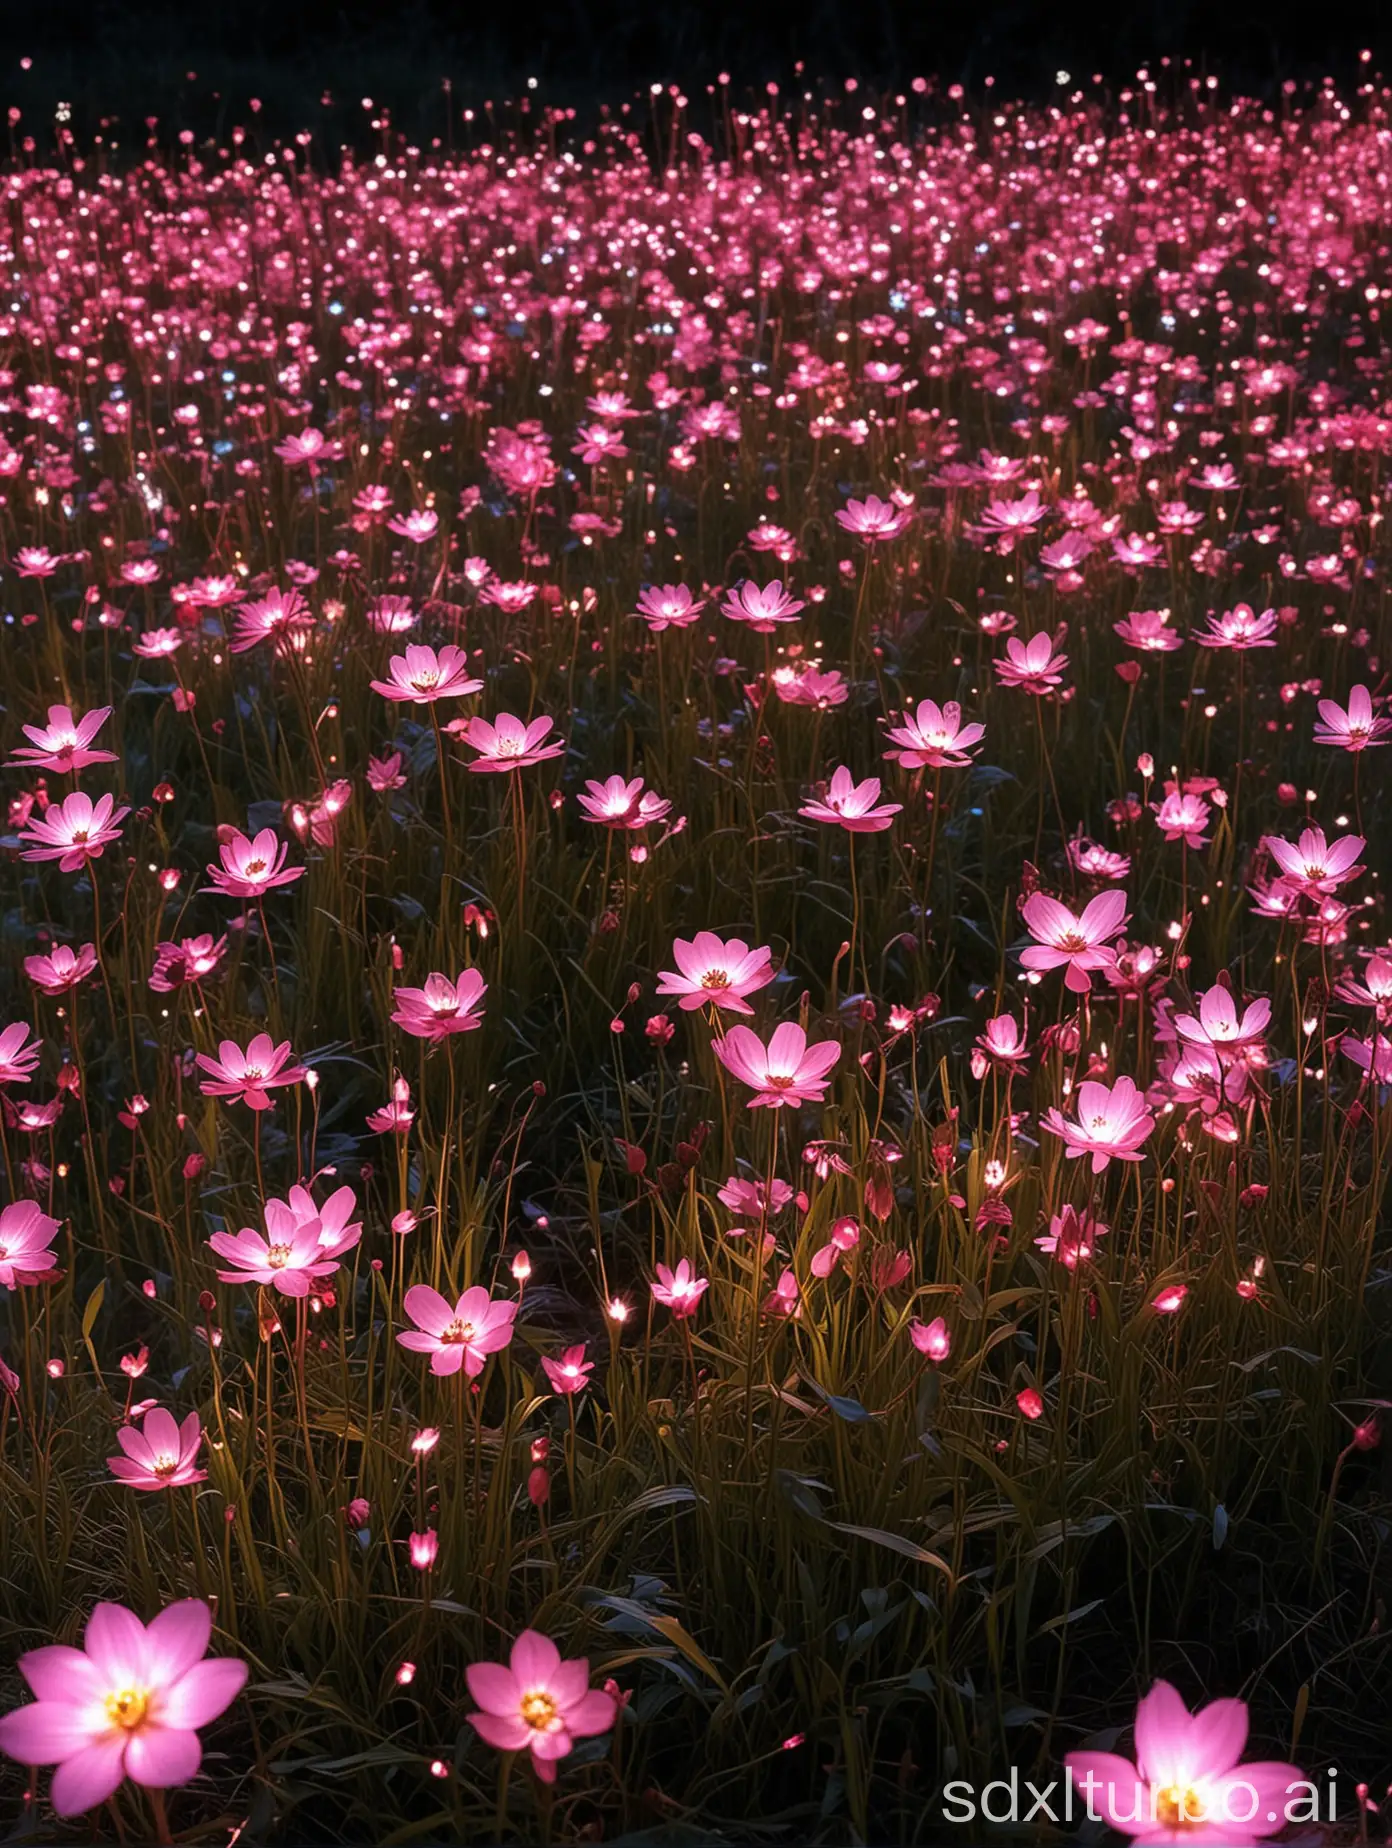 Glowing-Field-of-Pink-Flowers-Surreal-Nighttime-Fantasy-Art-by-Bruce-Munro